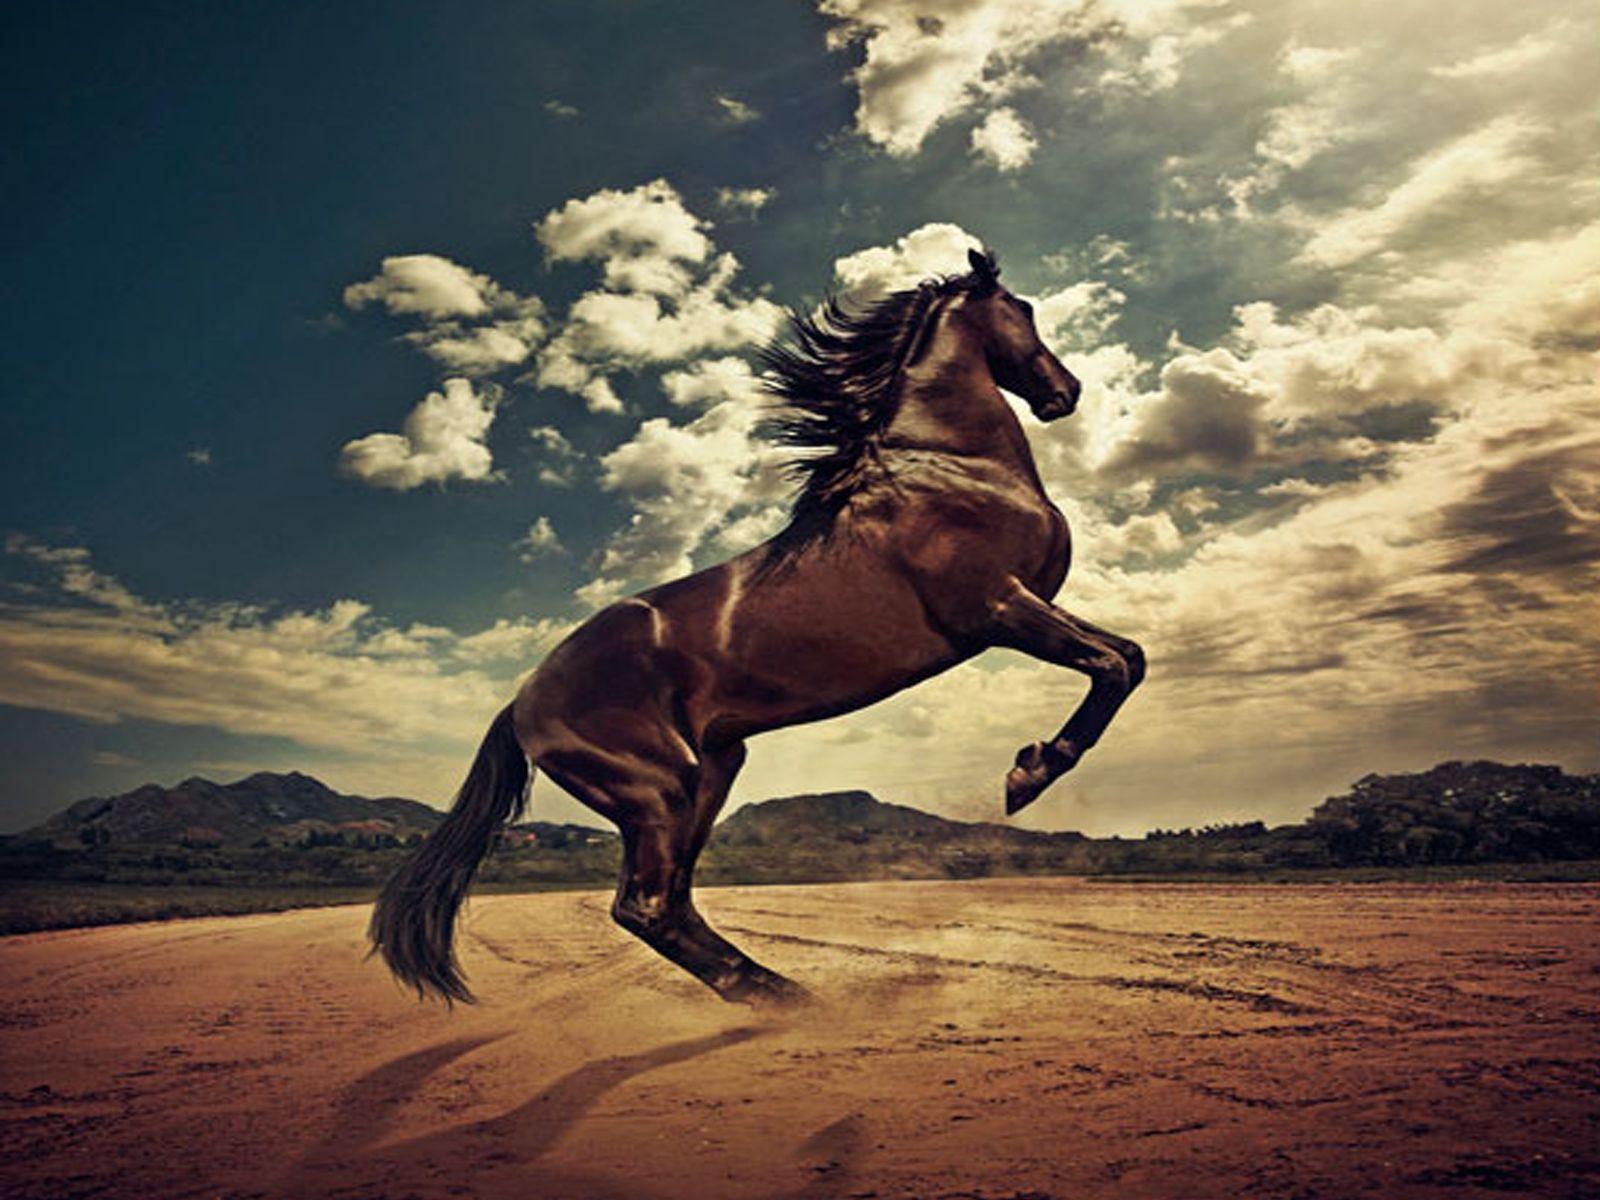 Exciting Running Horses Wallpaper HD 1920x1200PX HD Horse